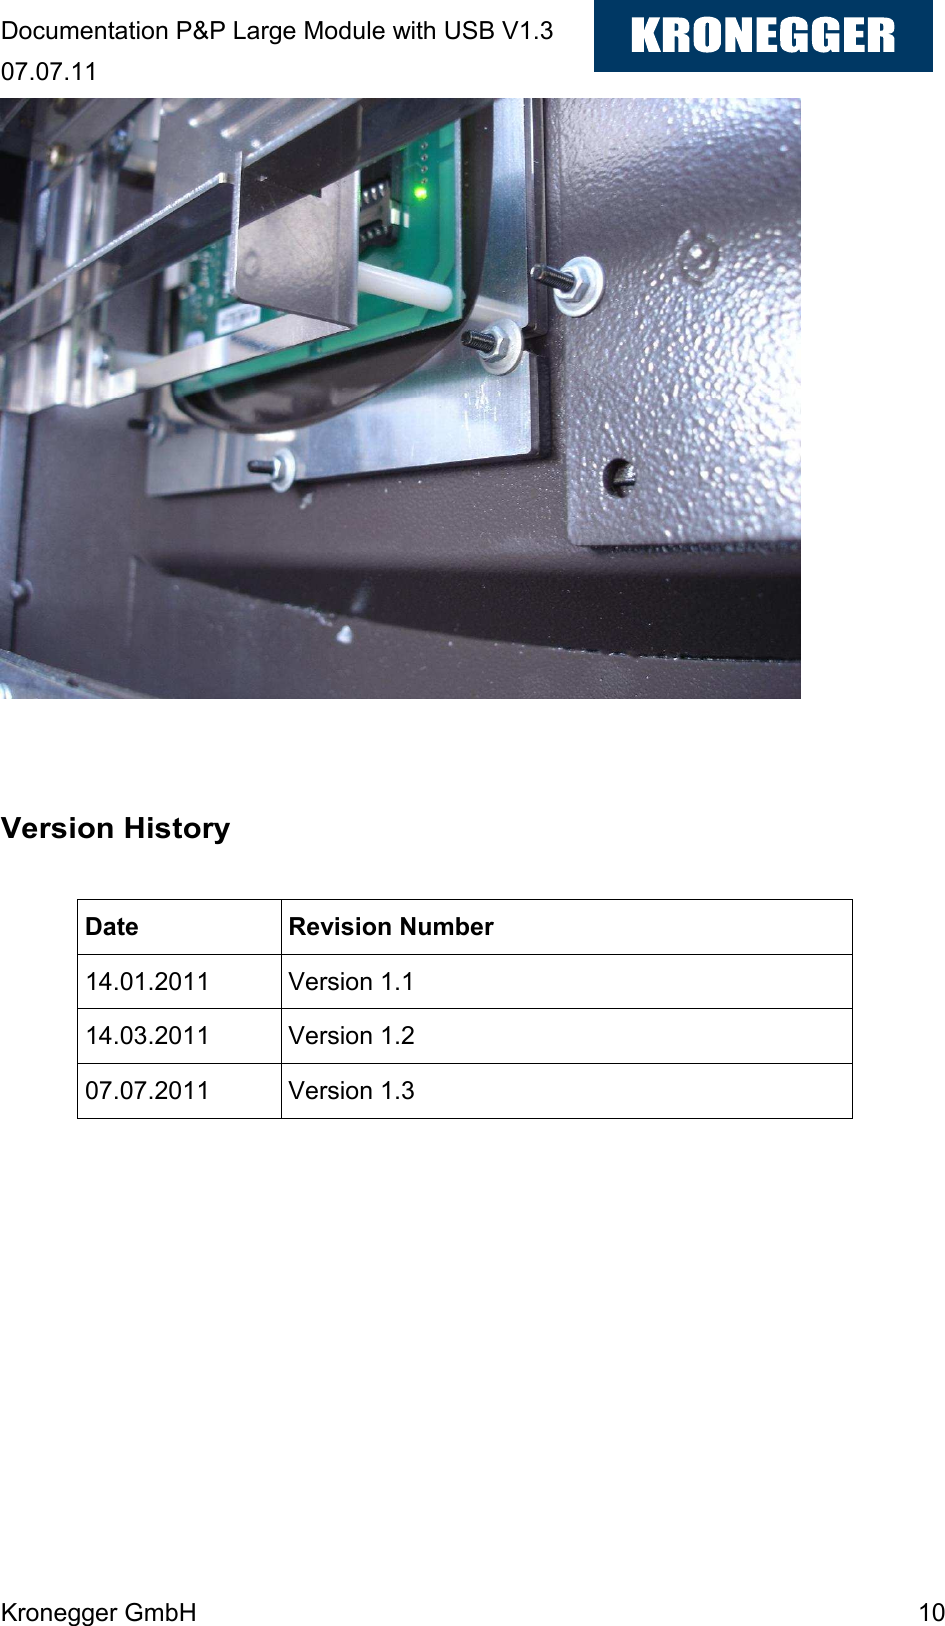 Documentation P&amp;P Large Module with USB V1.3 07.07.11 Kronegger GmbH    10    Version History  Date  Revision Number 14.01.2011  Version 1.1 14.03.2011  Version 1.2 07.07.2011  Version 1.3  